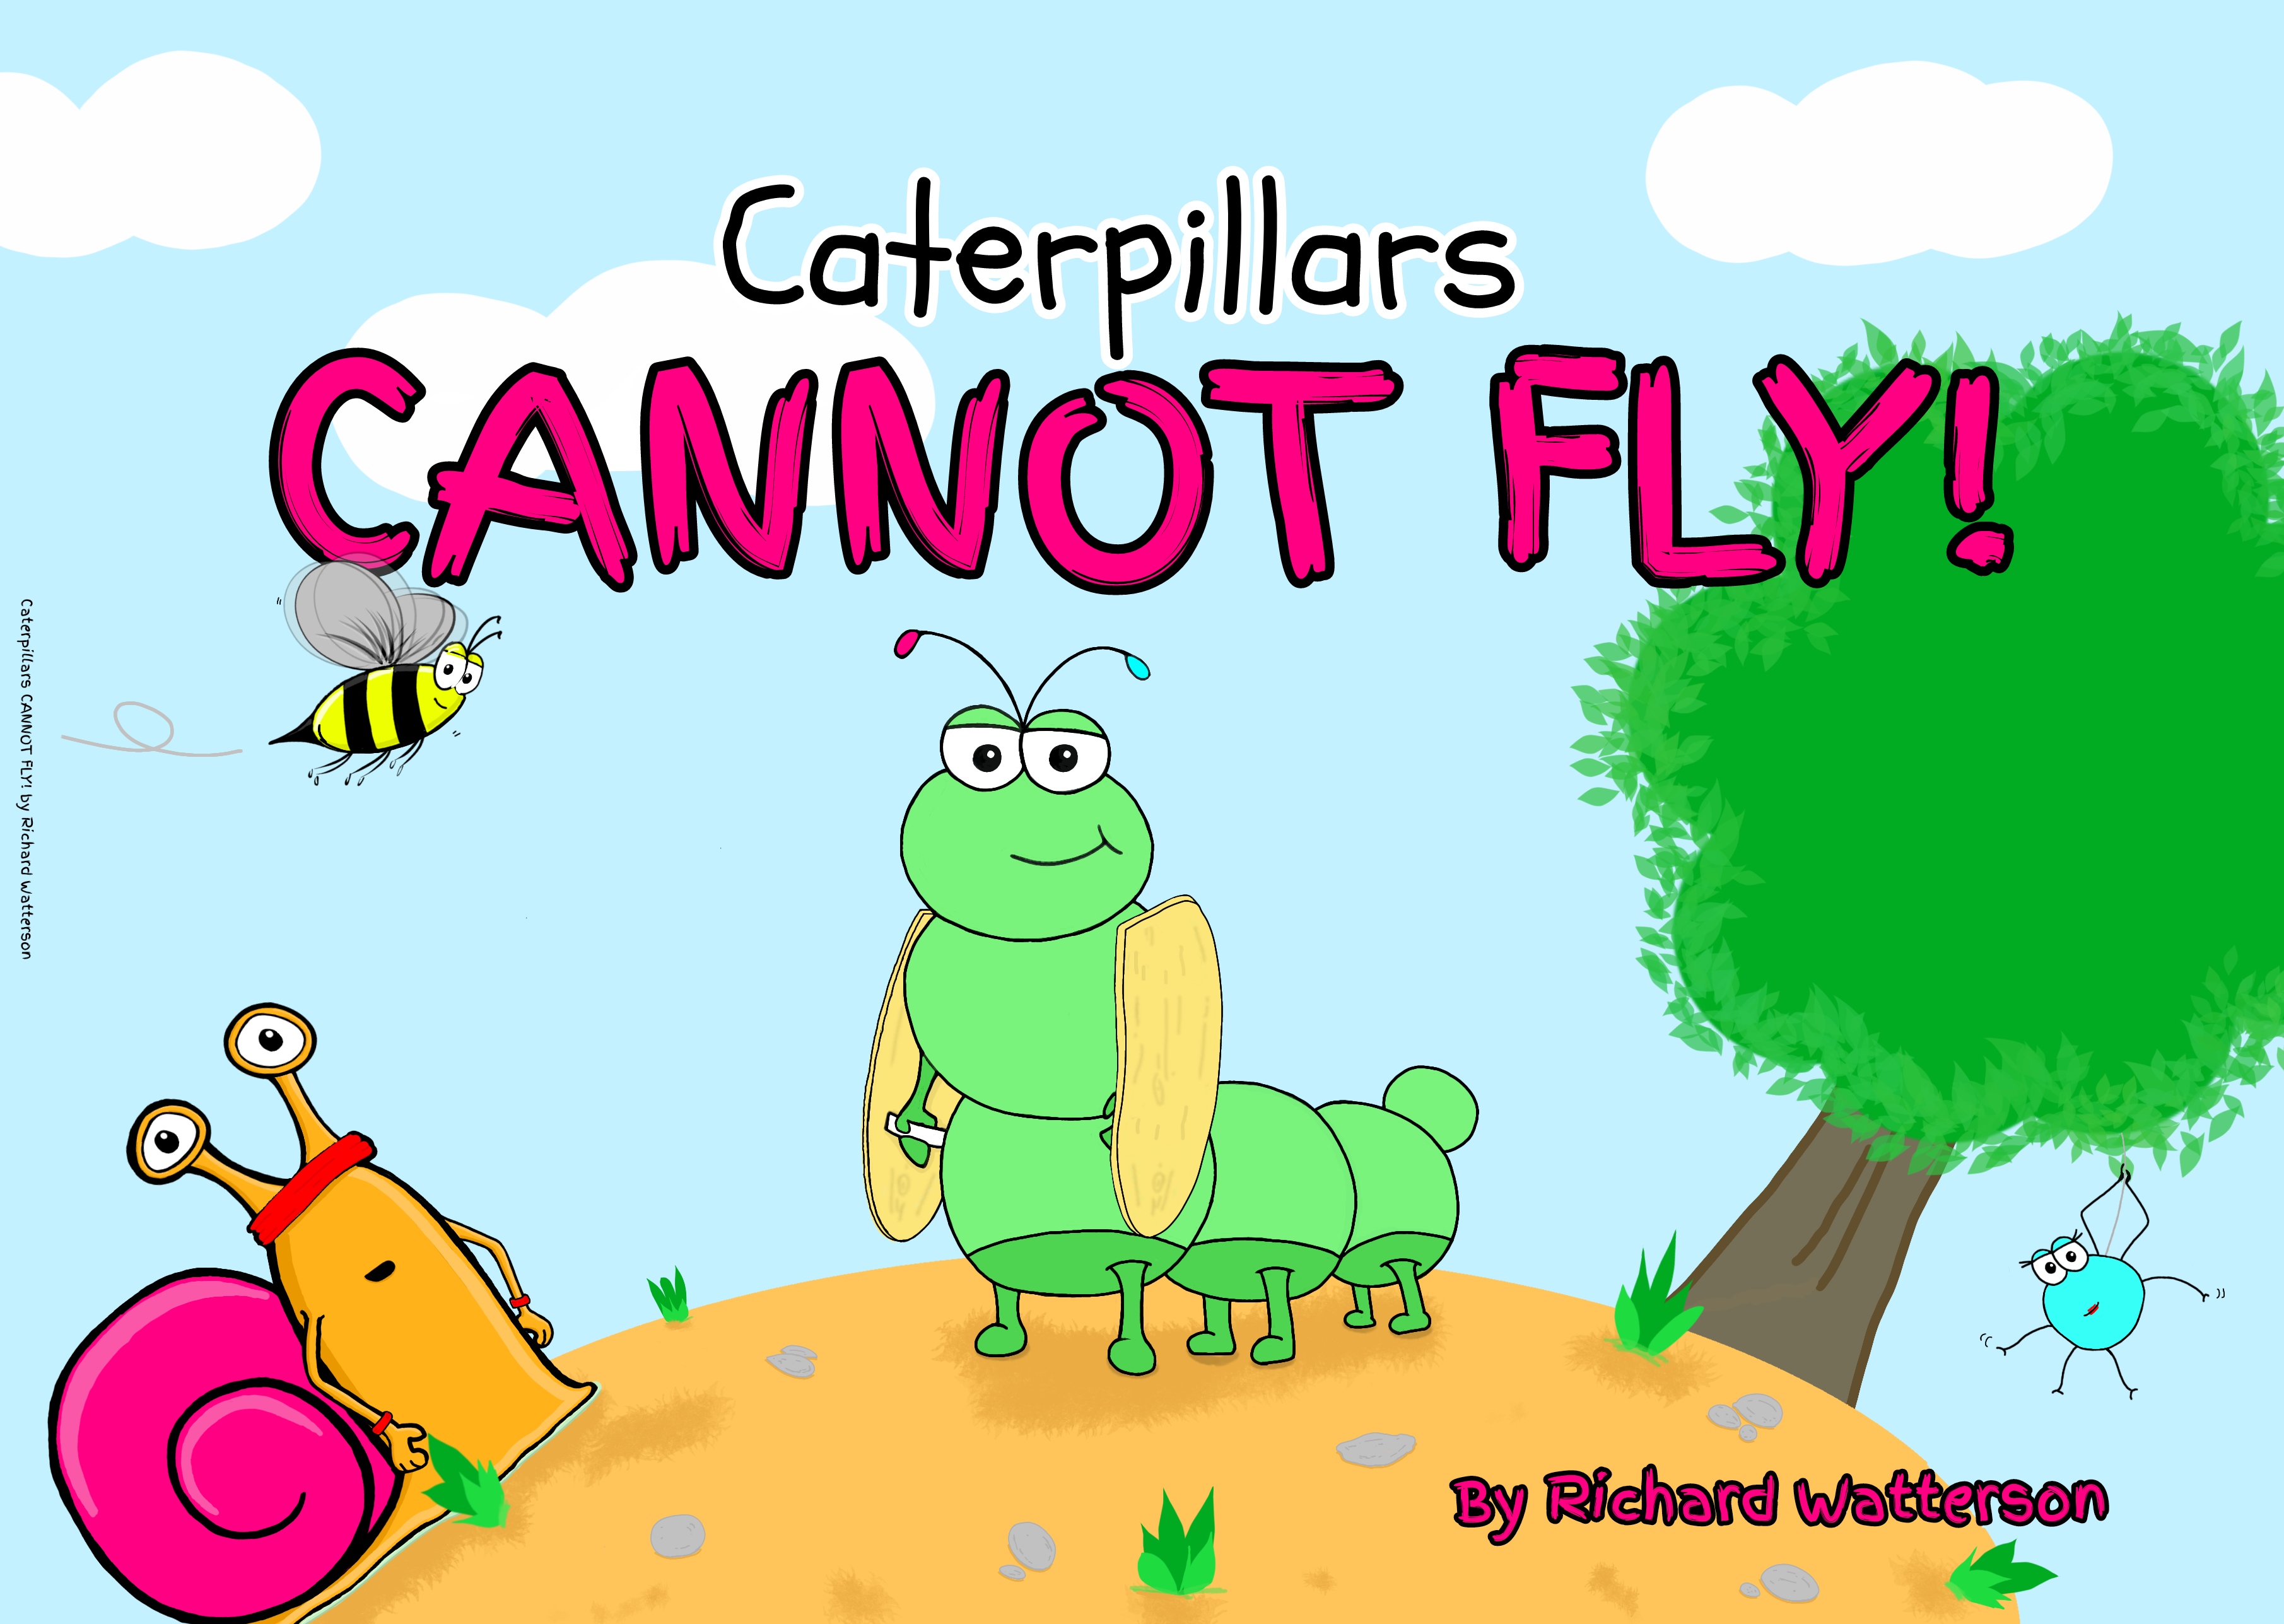 Caterpillars CANNOT FLY! by Richard Watterson Worldwide Del